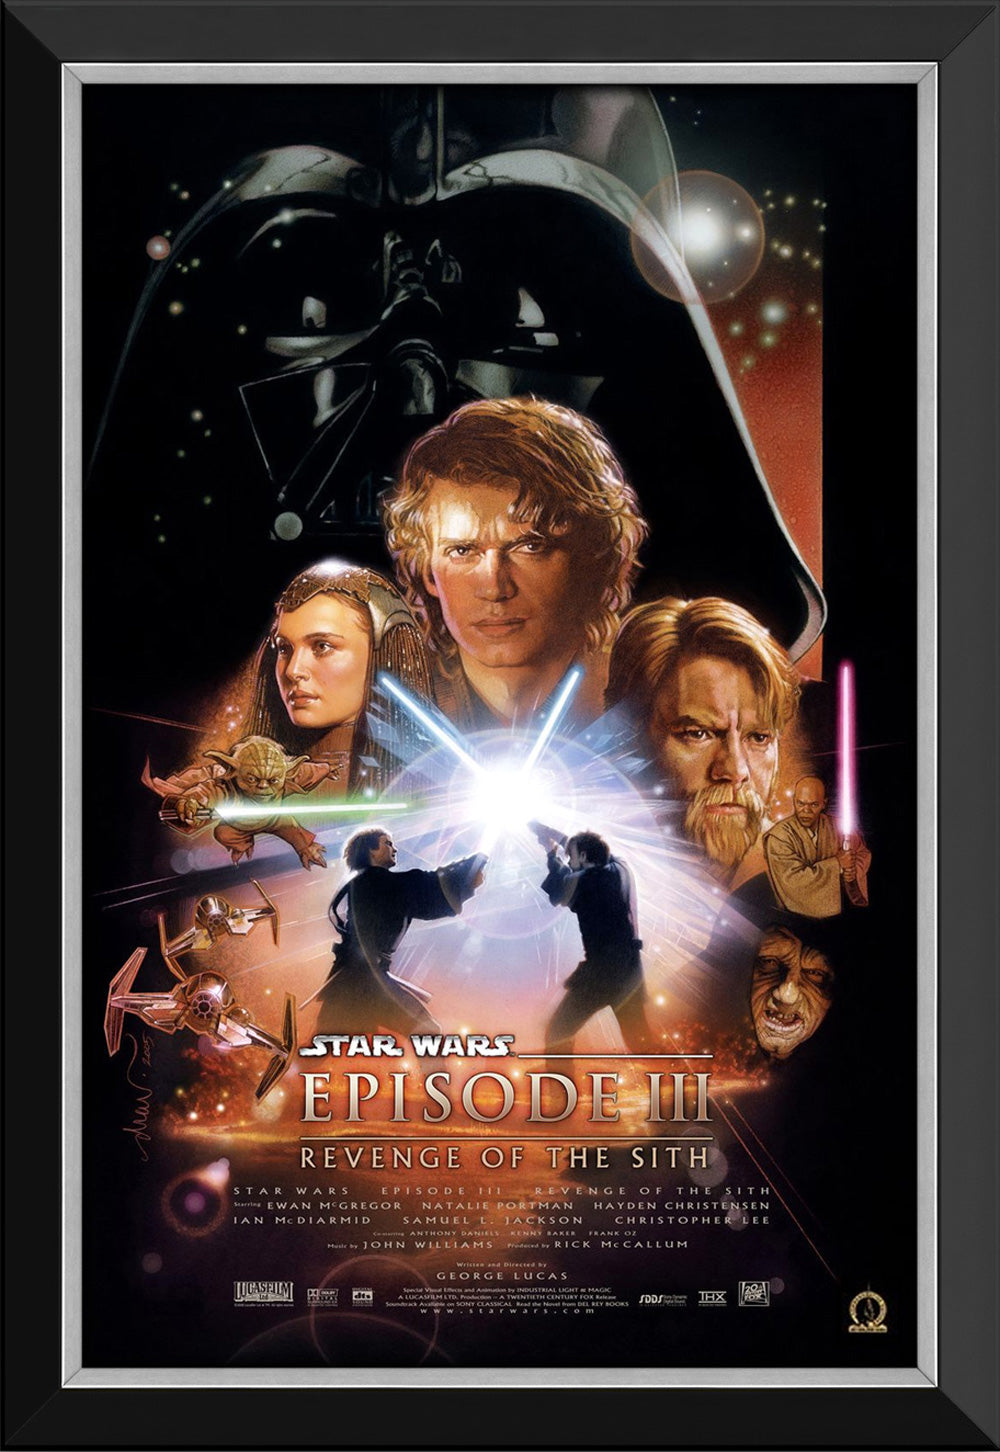 Star Wars Ep Iii Revenge Of The Sith - Movie Poster Reprint Framed Classic, Star Wars, Pop Culture Art, Movies, Collectibile Memorabilia, AAAPM32606